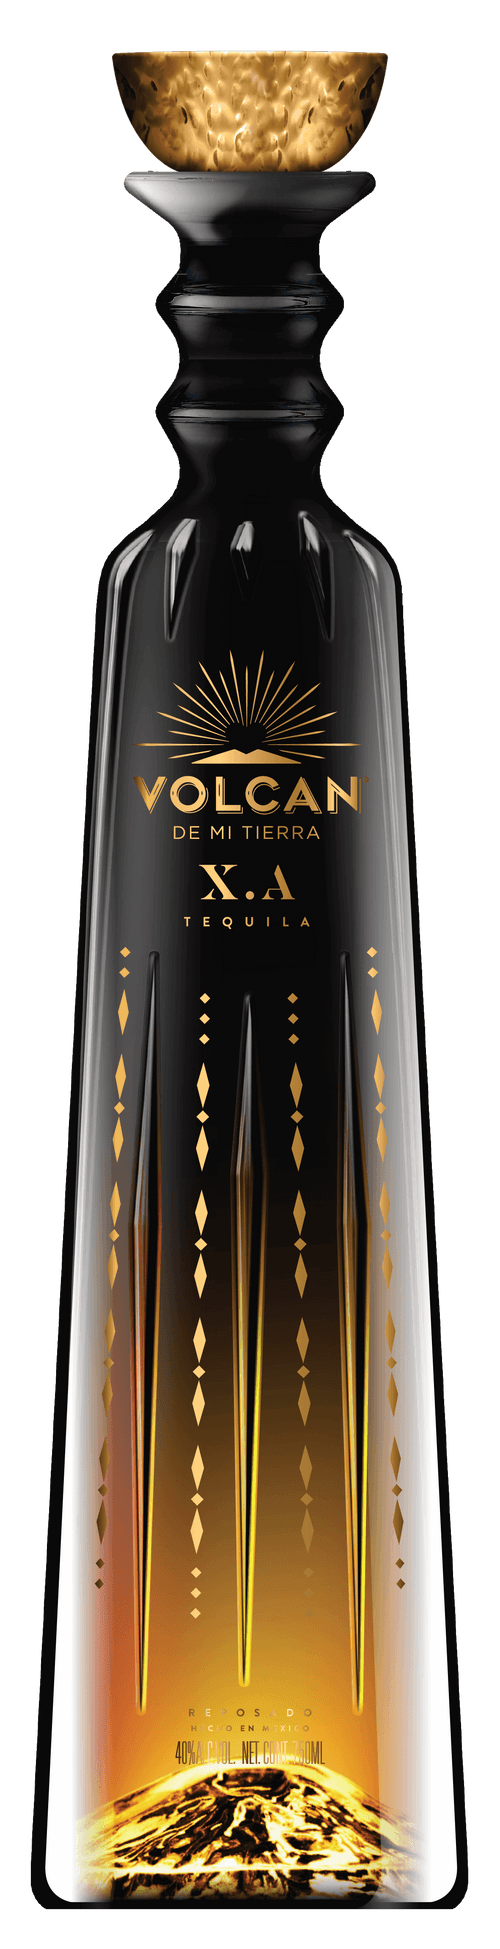 VOLCAN X.A TEQUILA 750 ML